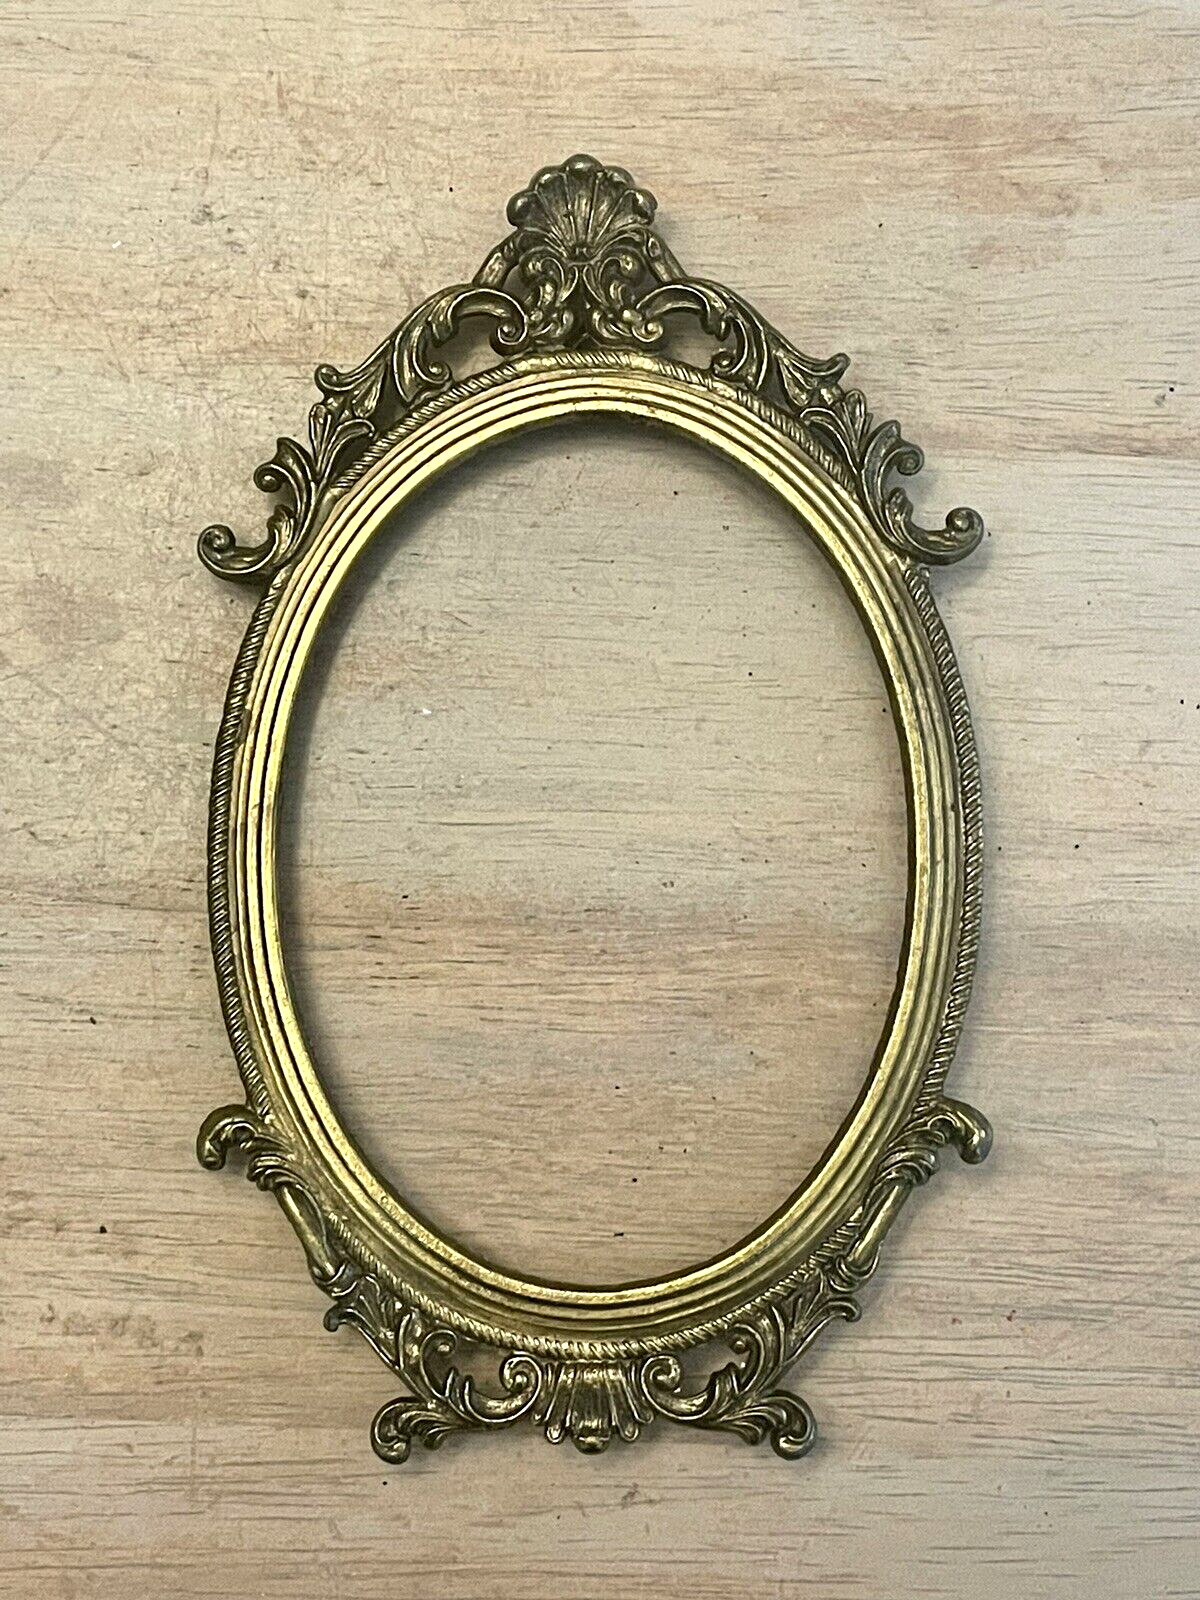 VTG ROCOCO STYLE OVAL ANTIQUE GOLD TONE  METAL PICTURE FRAME  WALL DECOR ITALY